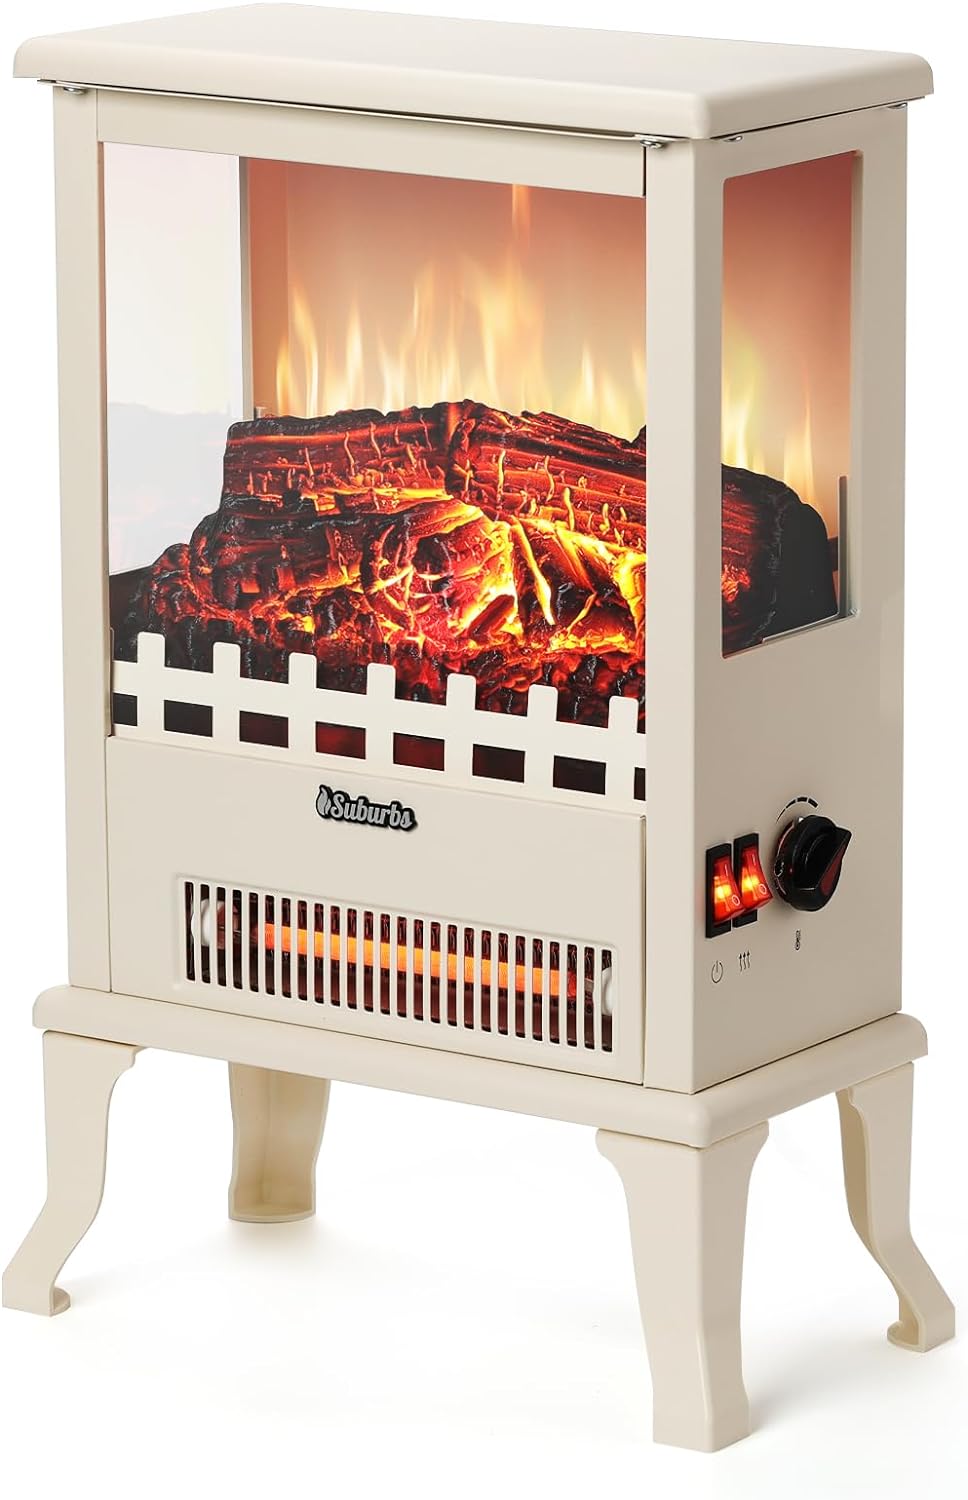 TURBRO Suburbs TS17Q Infrared Electric Fireplace Stove, 19" Freestanding Stove Heater